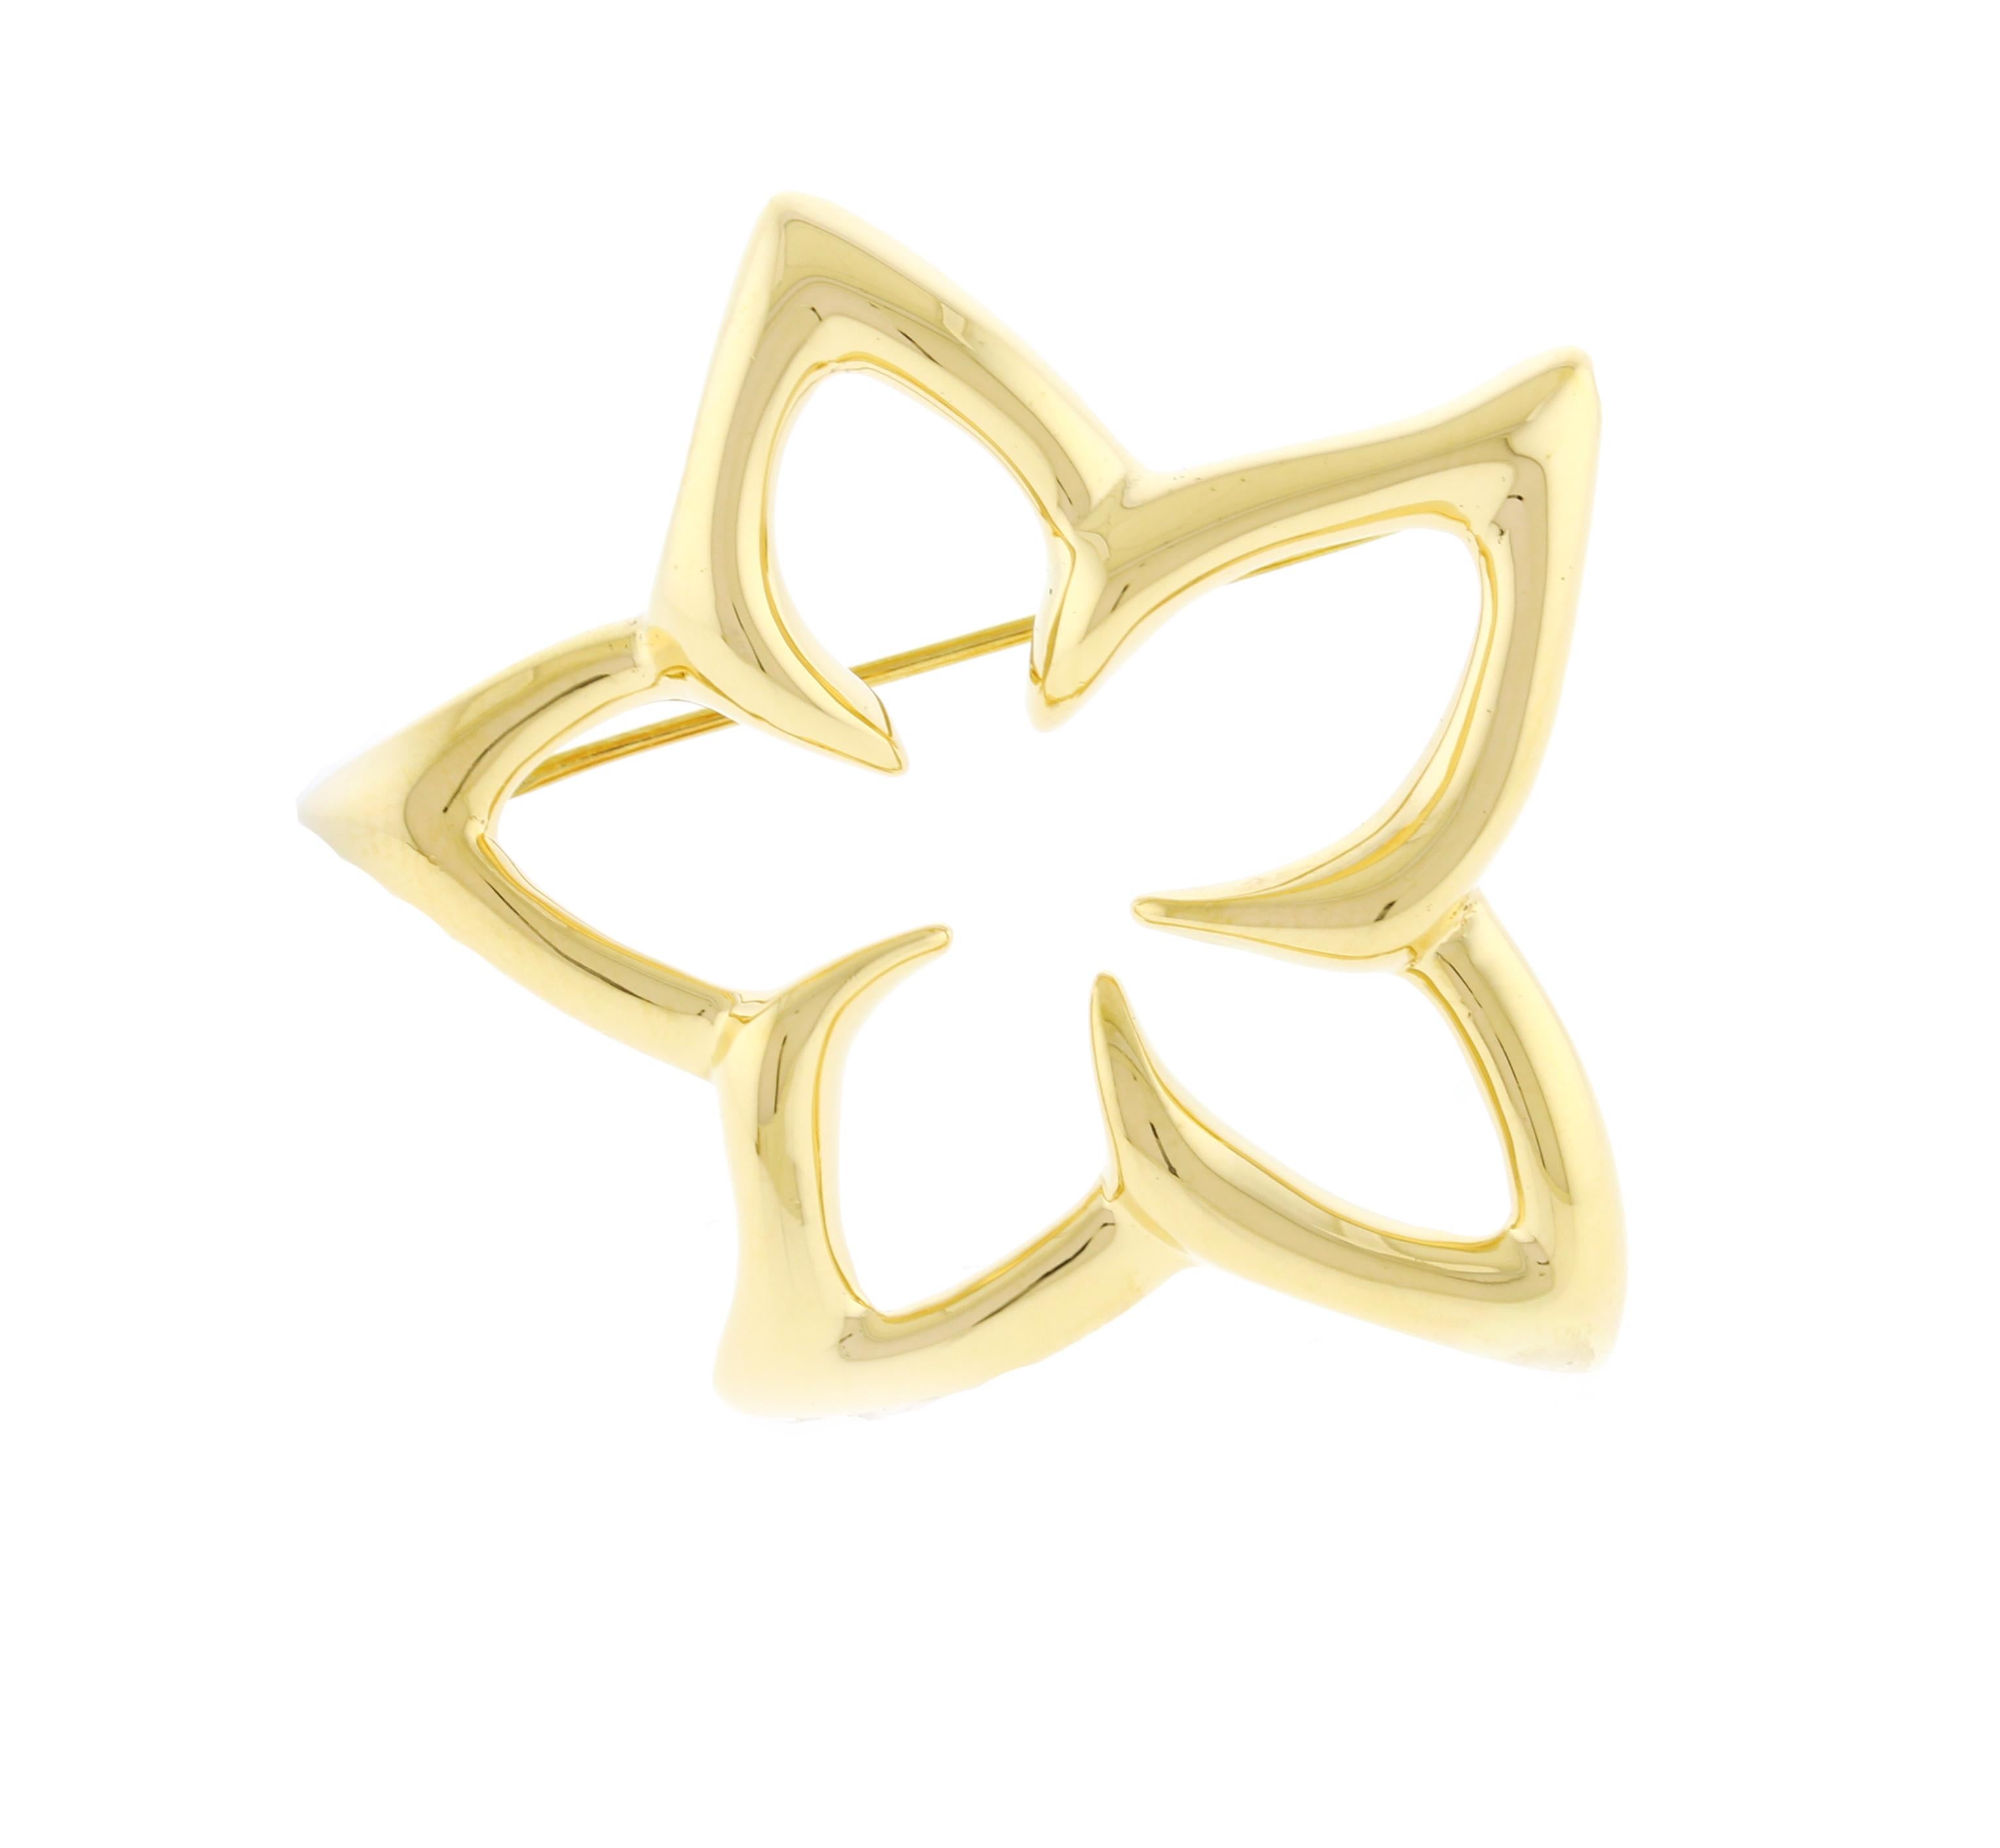 From Tiffany& Co. this wonderful open floral star brooch
♦ Designer: Tiffany & Co.
♦ Metal: 18 karat
♦ Circa 1980s
♦ 1 ¾ inches across
♦ 13 grams
♦ Packaging: Tiffany Box
♦ Condition: Excellent , pre-owned
 
